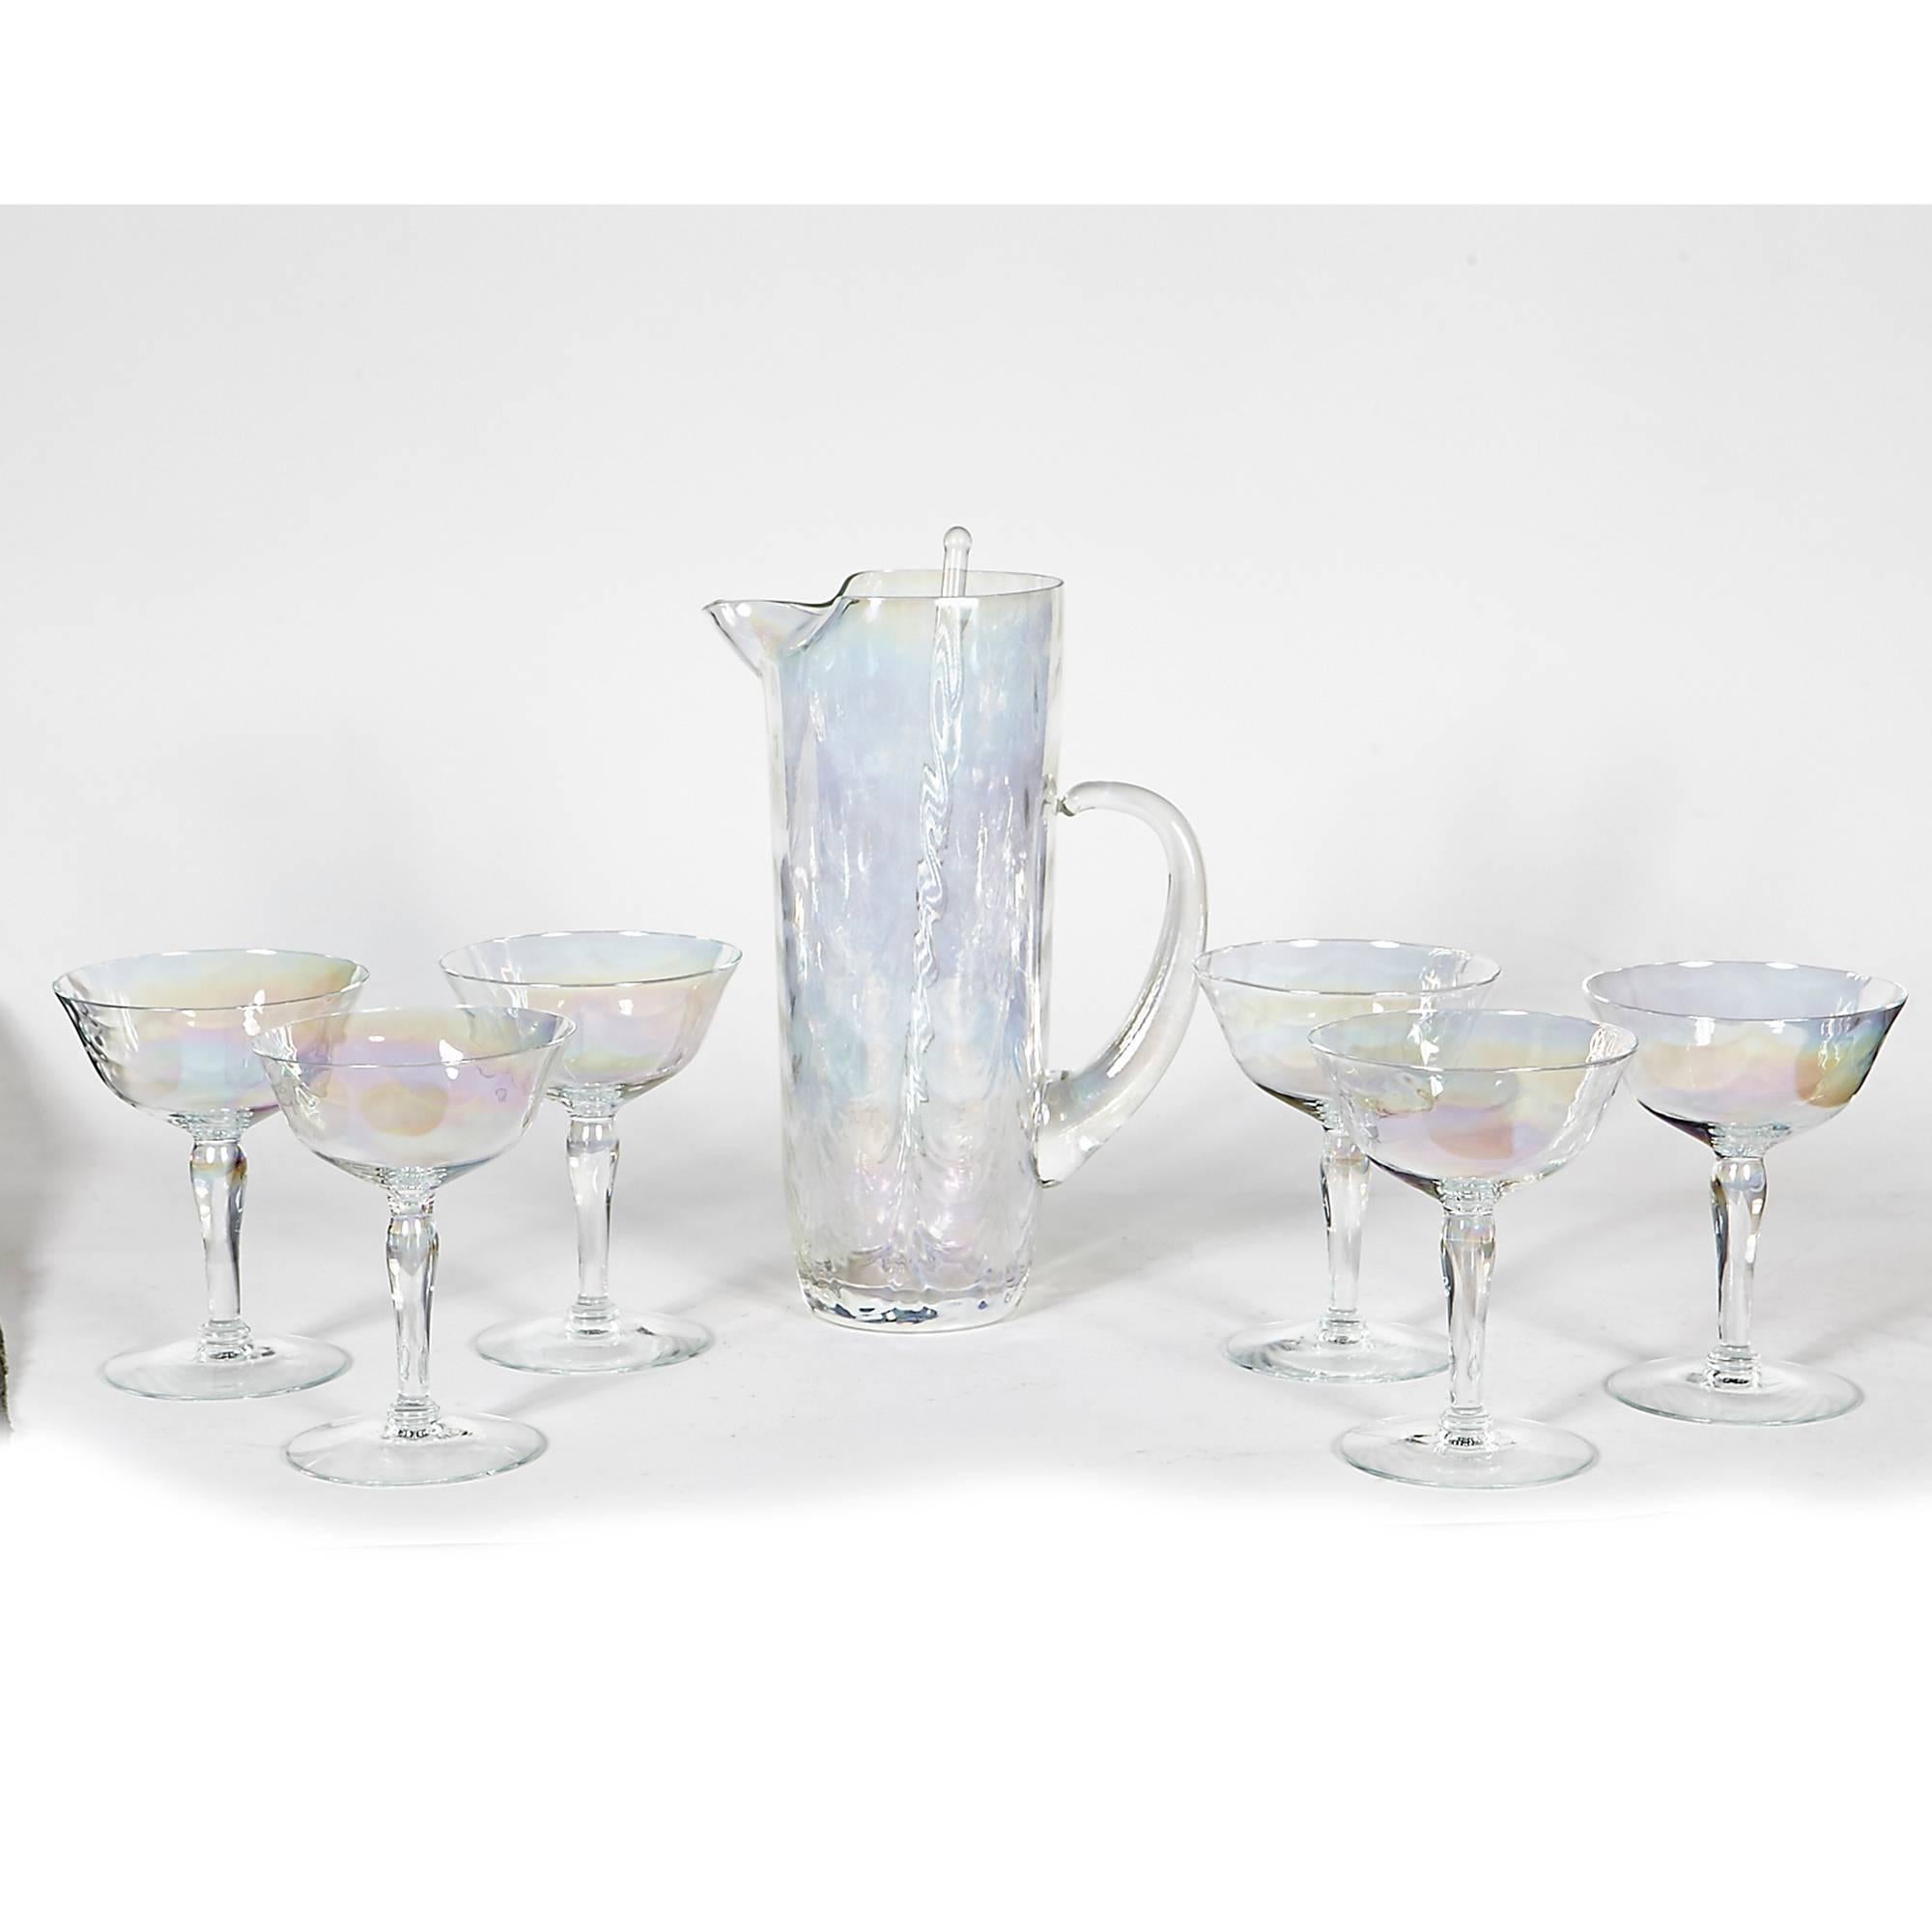 1950s Iridescent Glass Beverage Entertainment Set of 32 Pieces For Sale 1